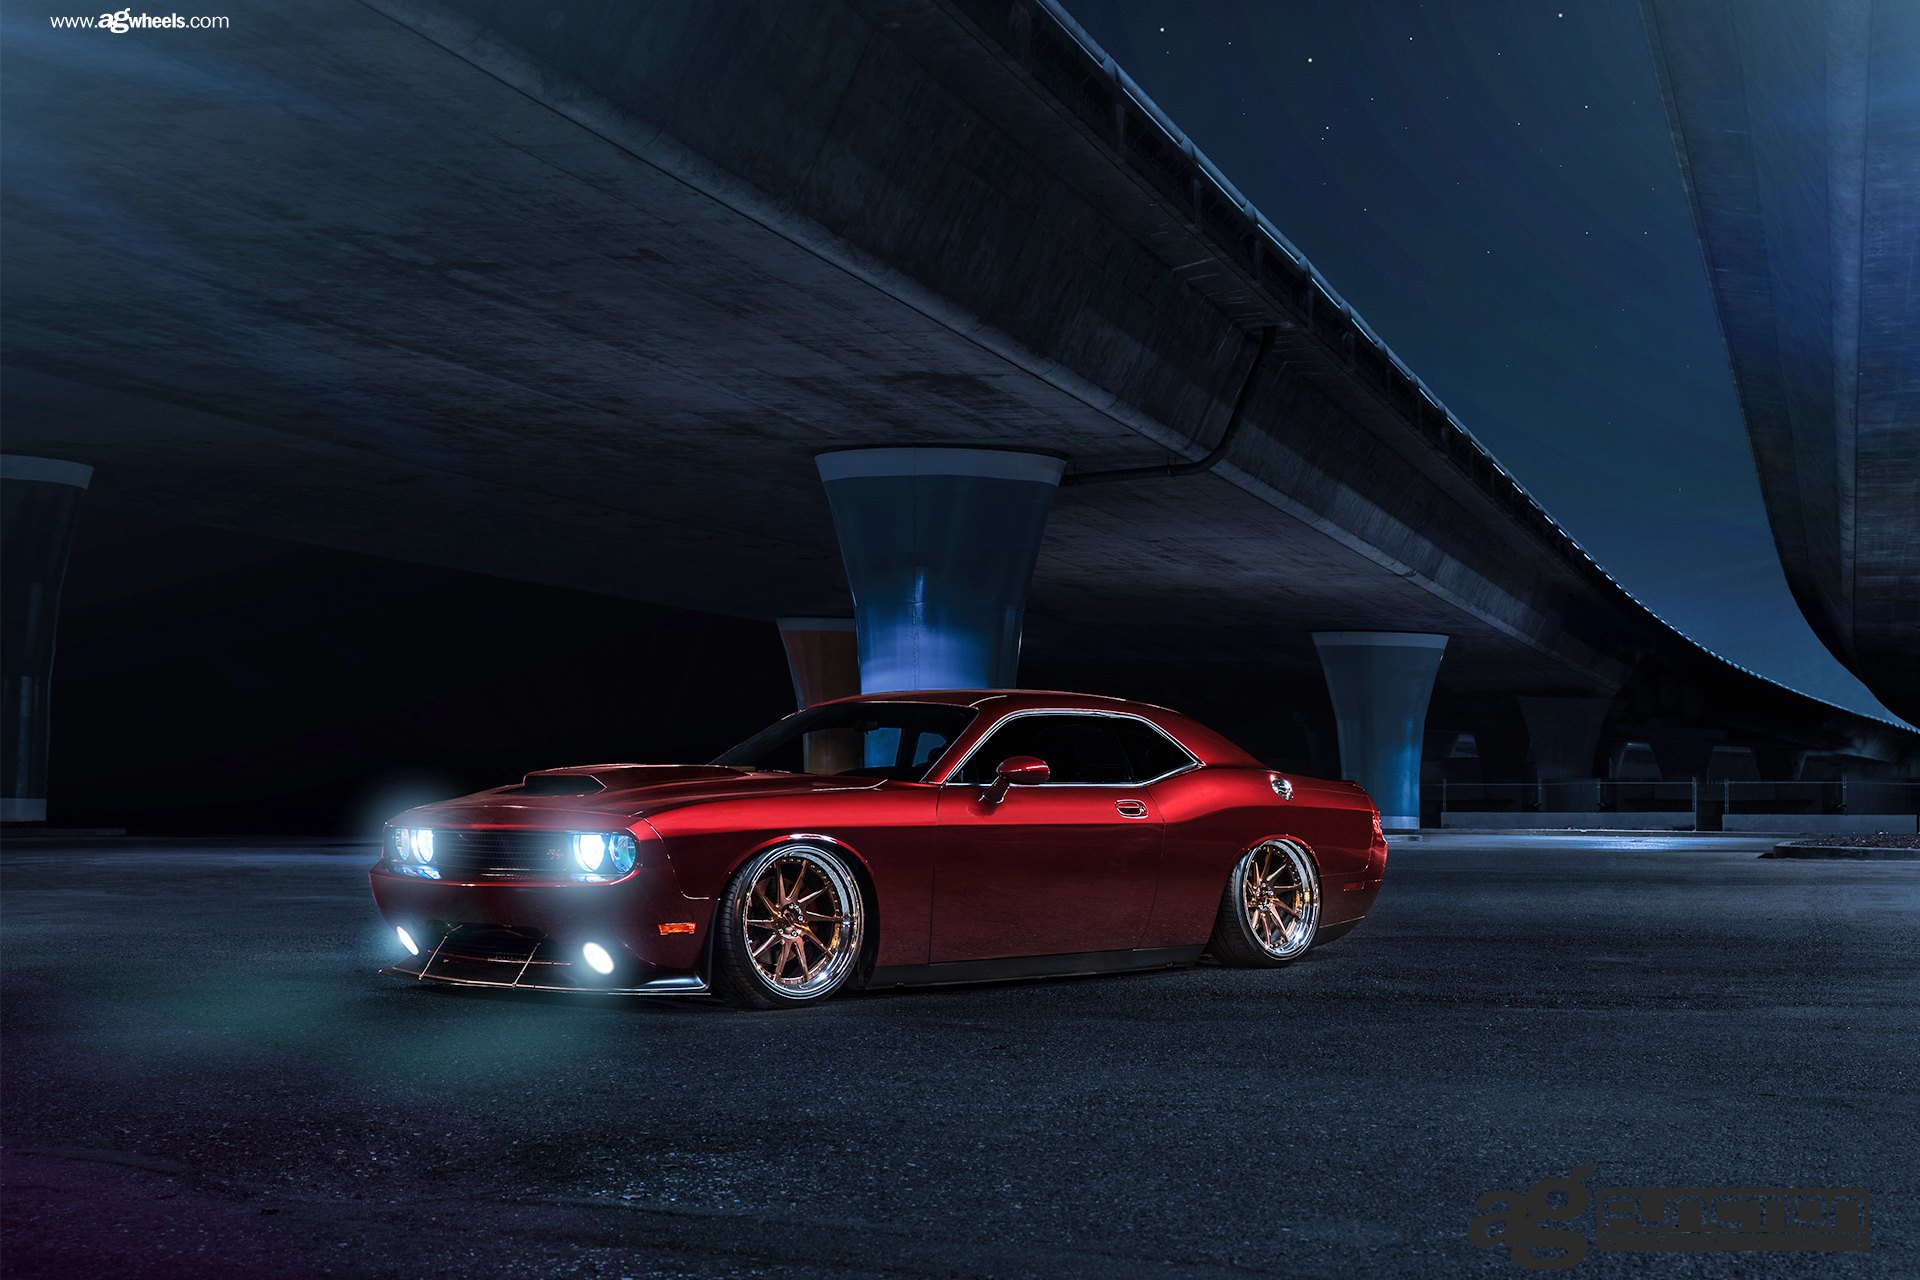 Red Stanced Dodge Challenger RT with Custom Hood - Photo by Avant Garde Wheels